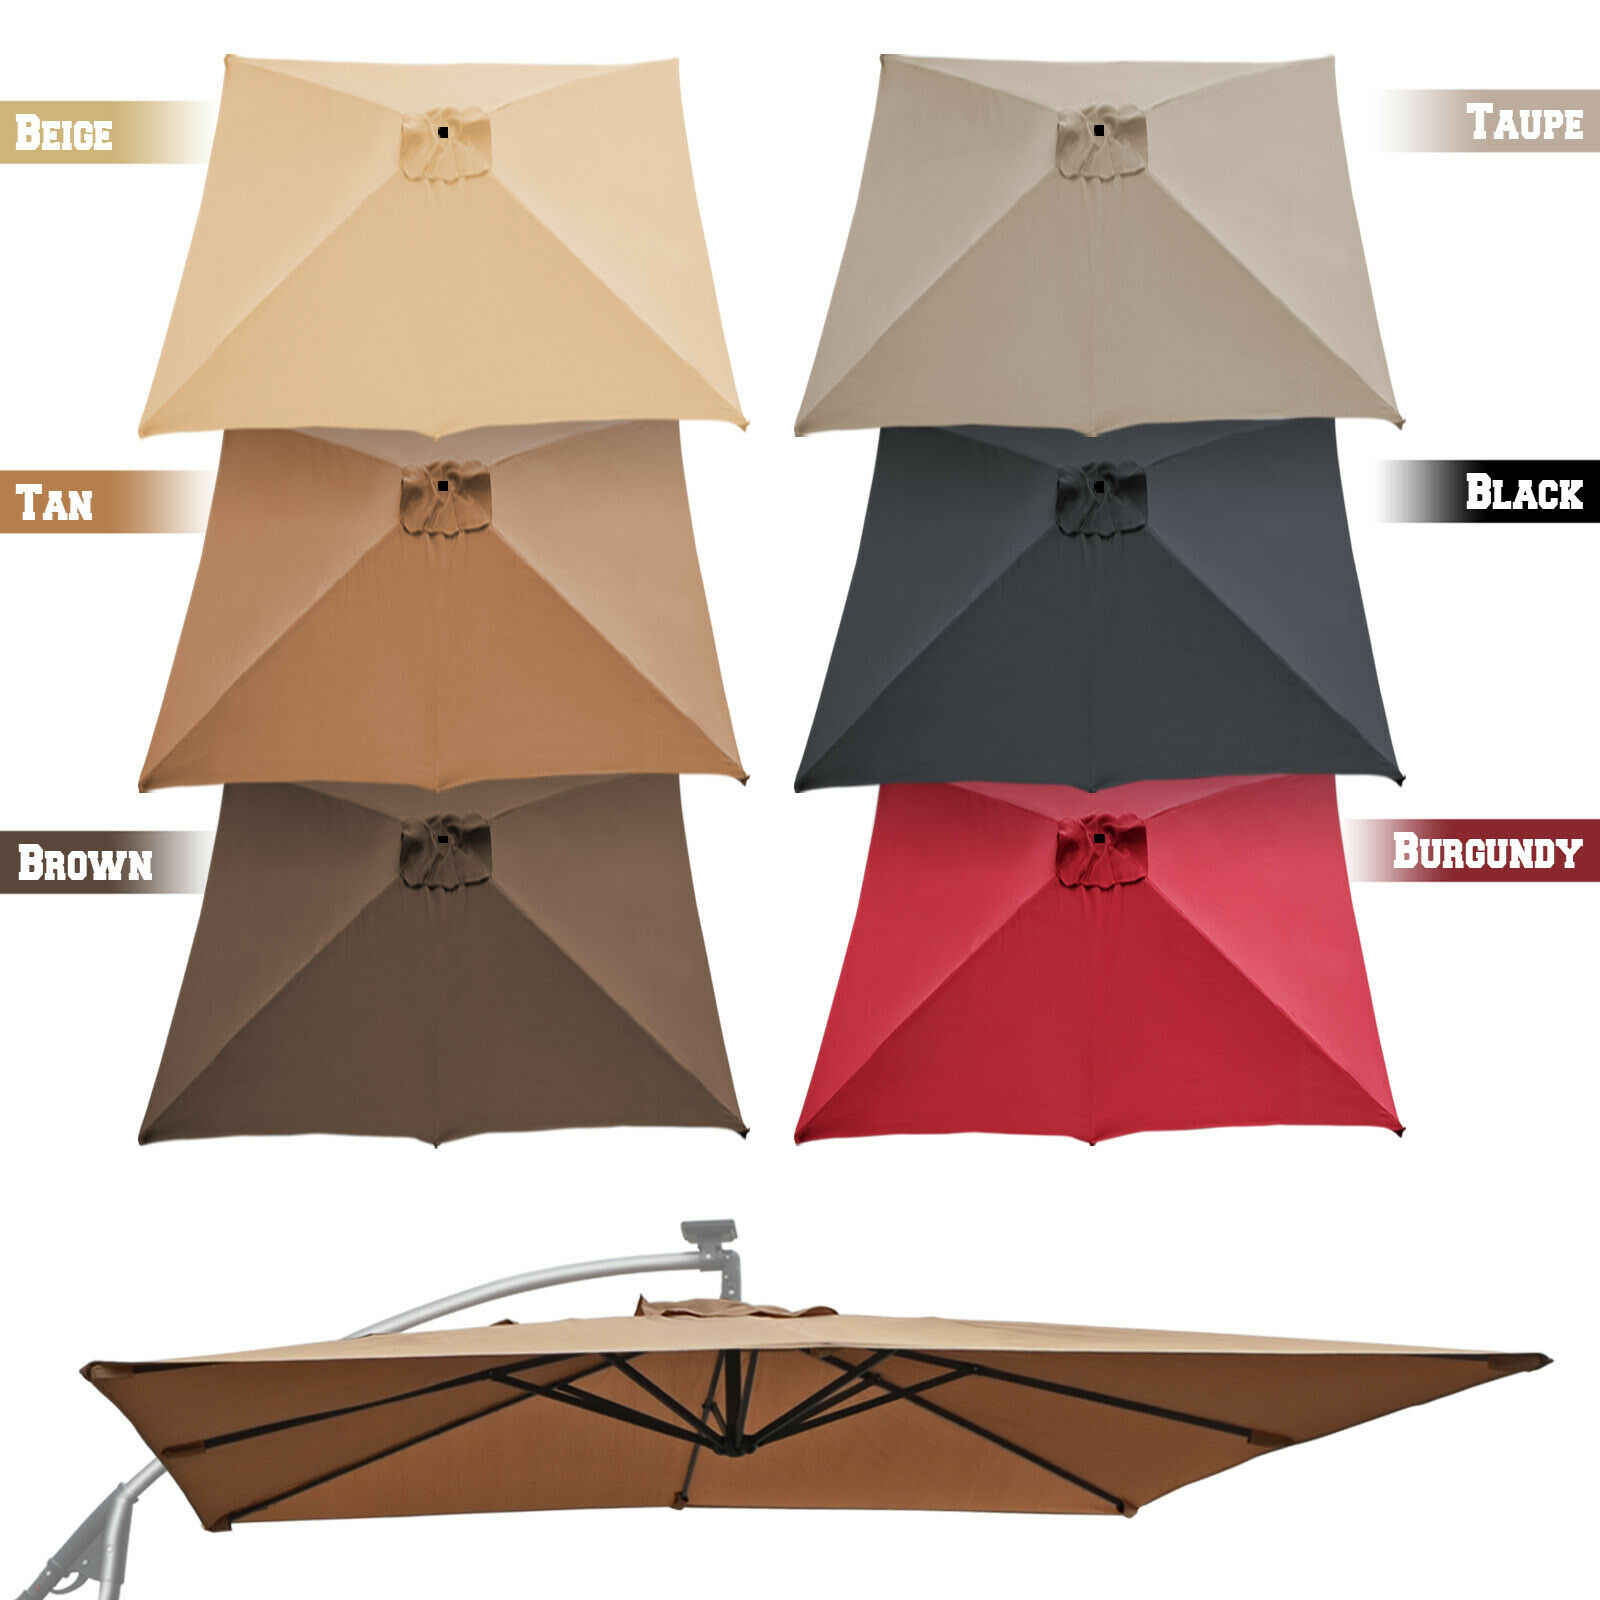 Replacement Canopy for Square 8.2x8.2ft 8 Ribs Hanging Solar Umbrella Cover Top